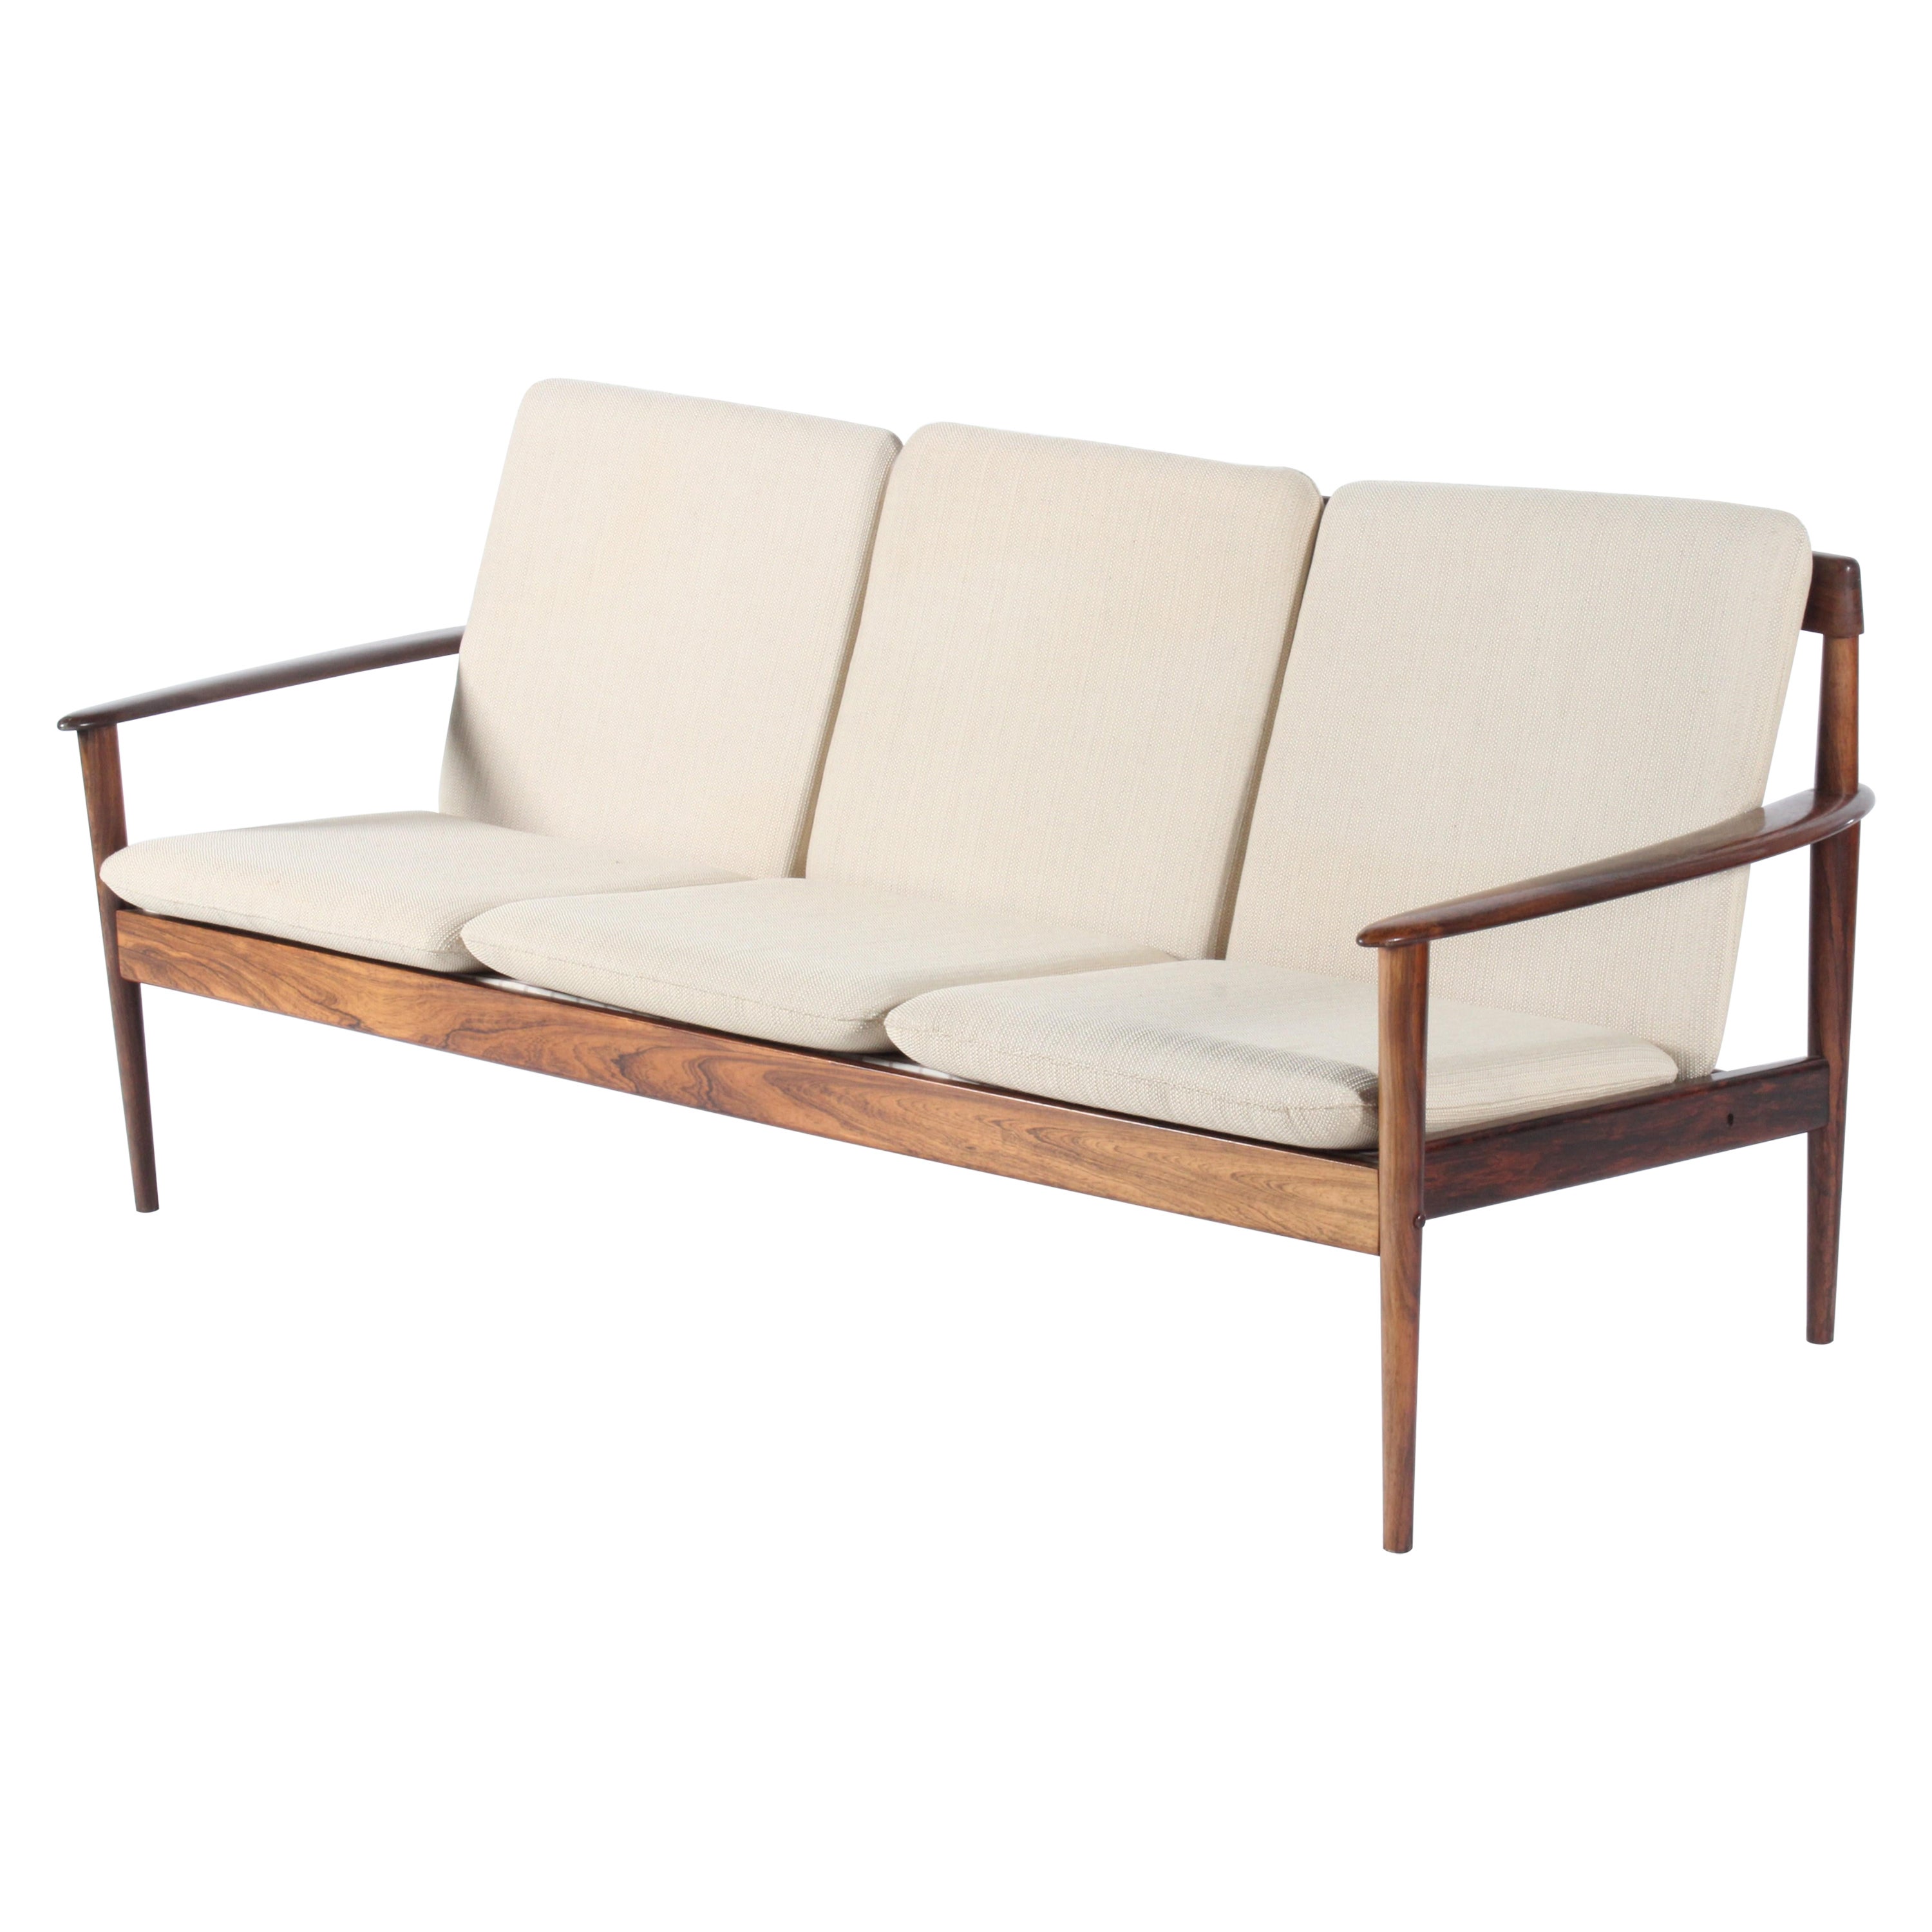 Stunning Three Seater Danish Sofa By Grete Jalk  For Sale